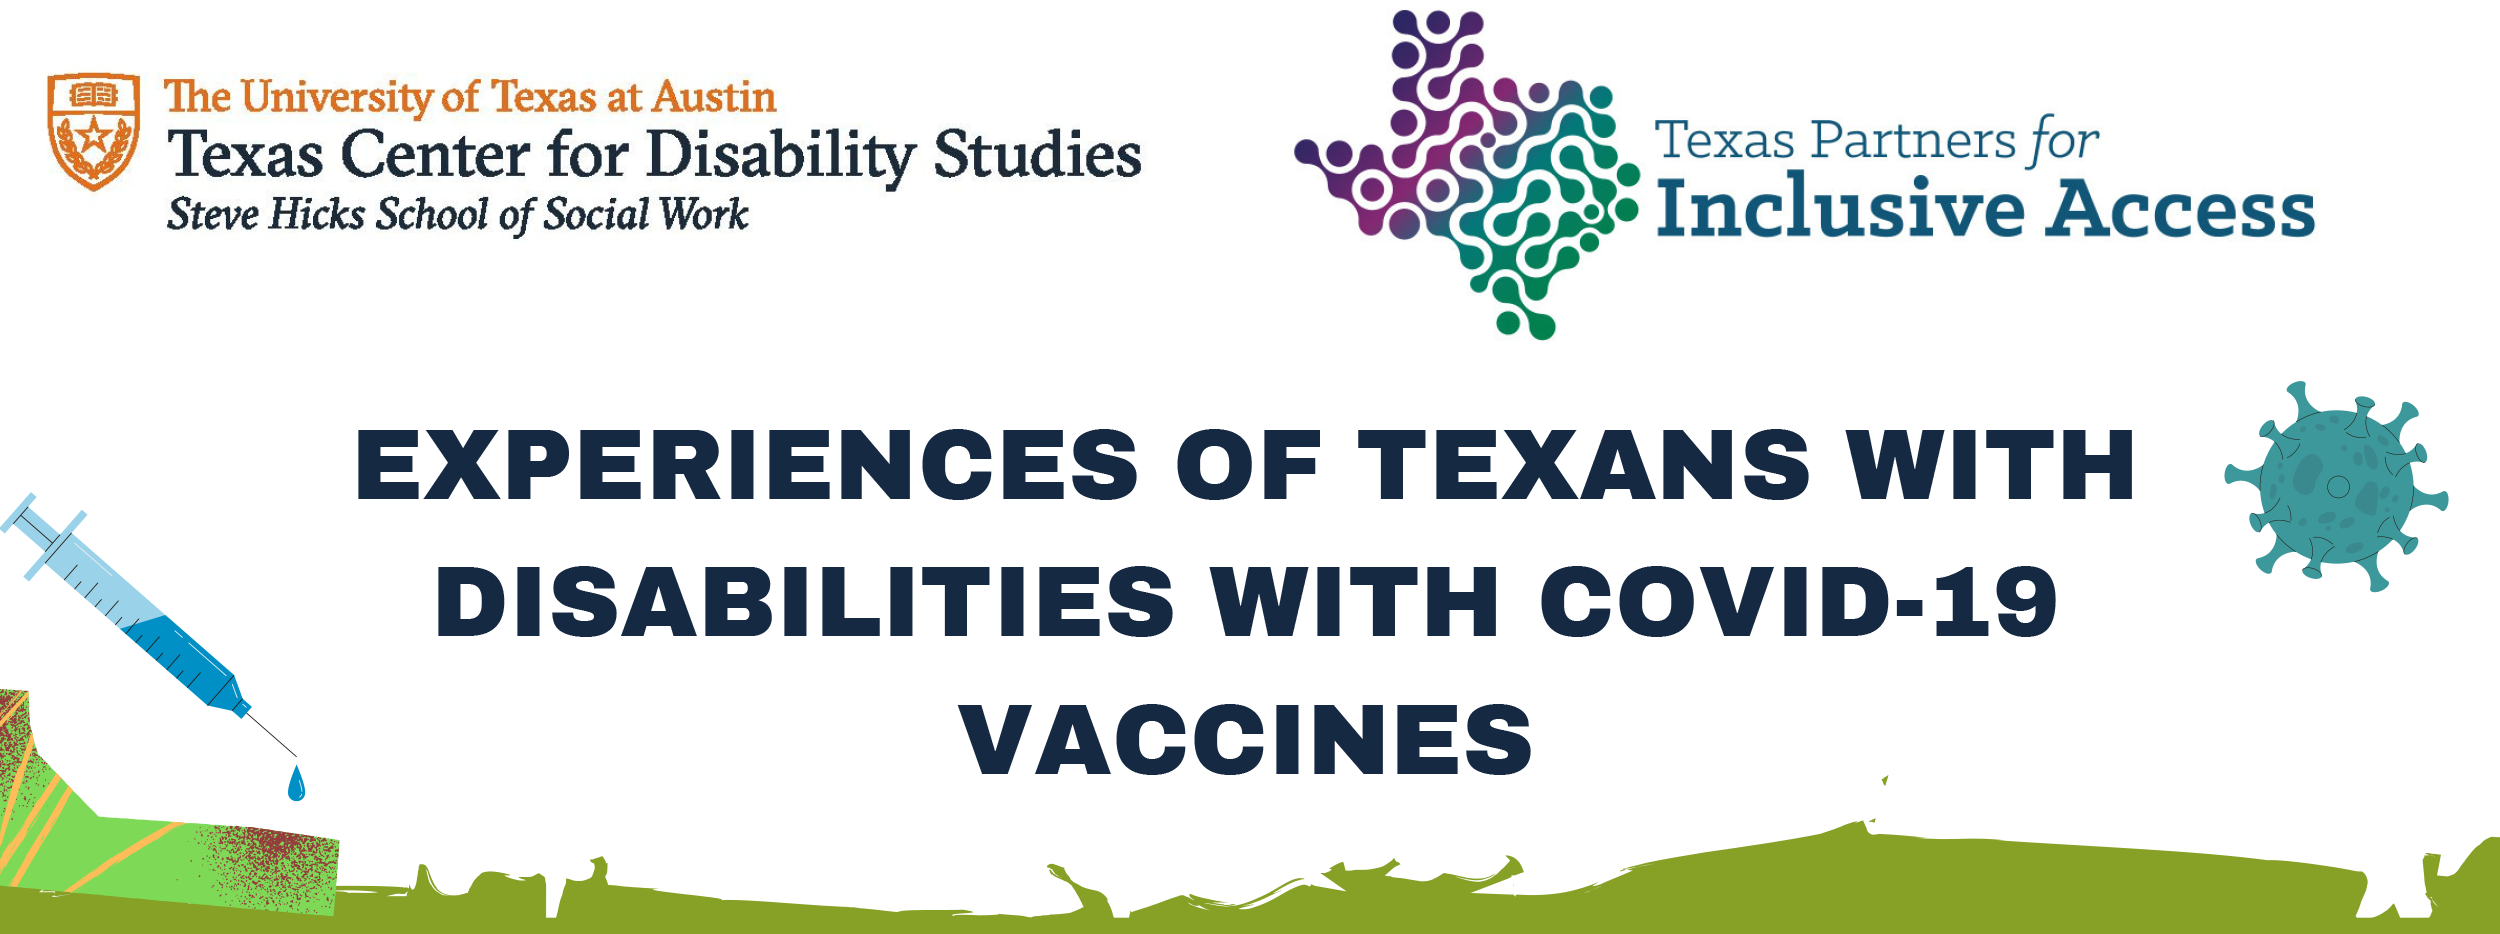 Experiences of Texans with Disabilities with Covid-19 Vaccines